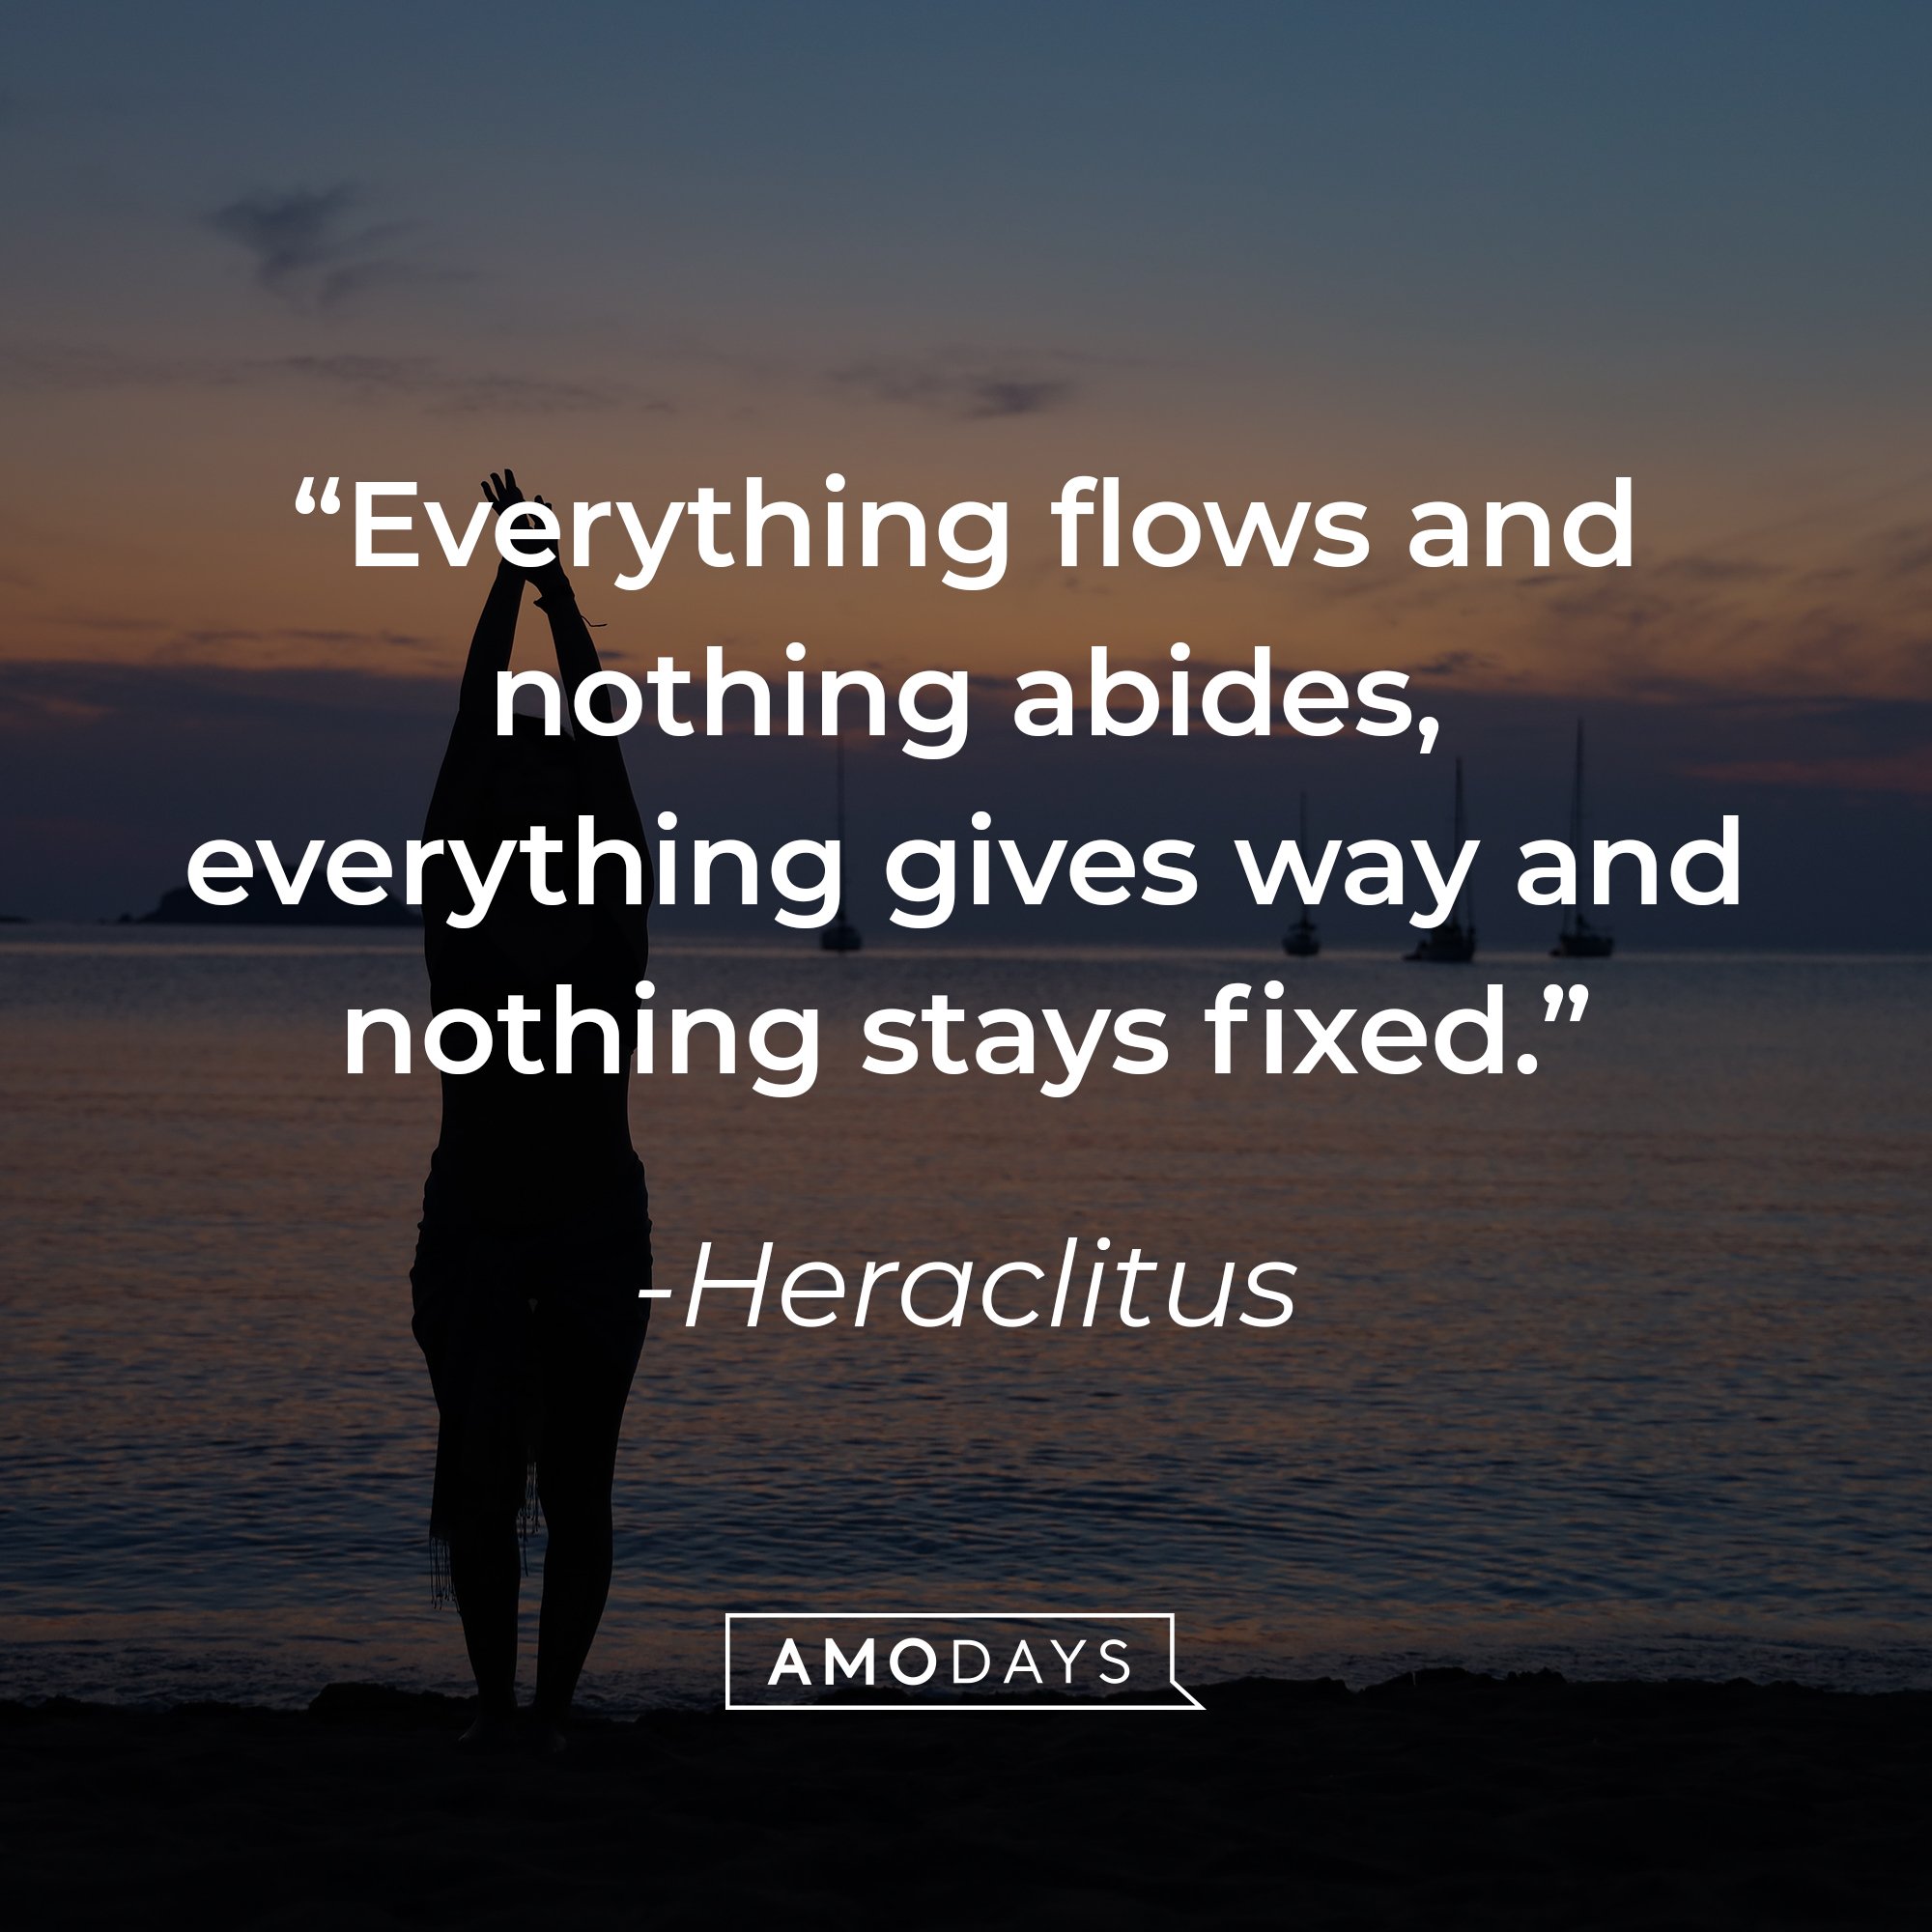 Heraclitus' quote: "Everything flows and nothing abides, everything gives way and nothing stays fixed." | Image: AmoDays